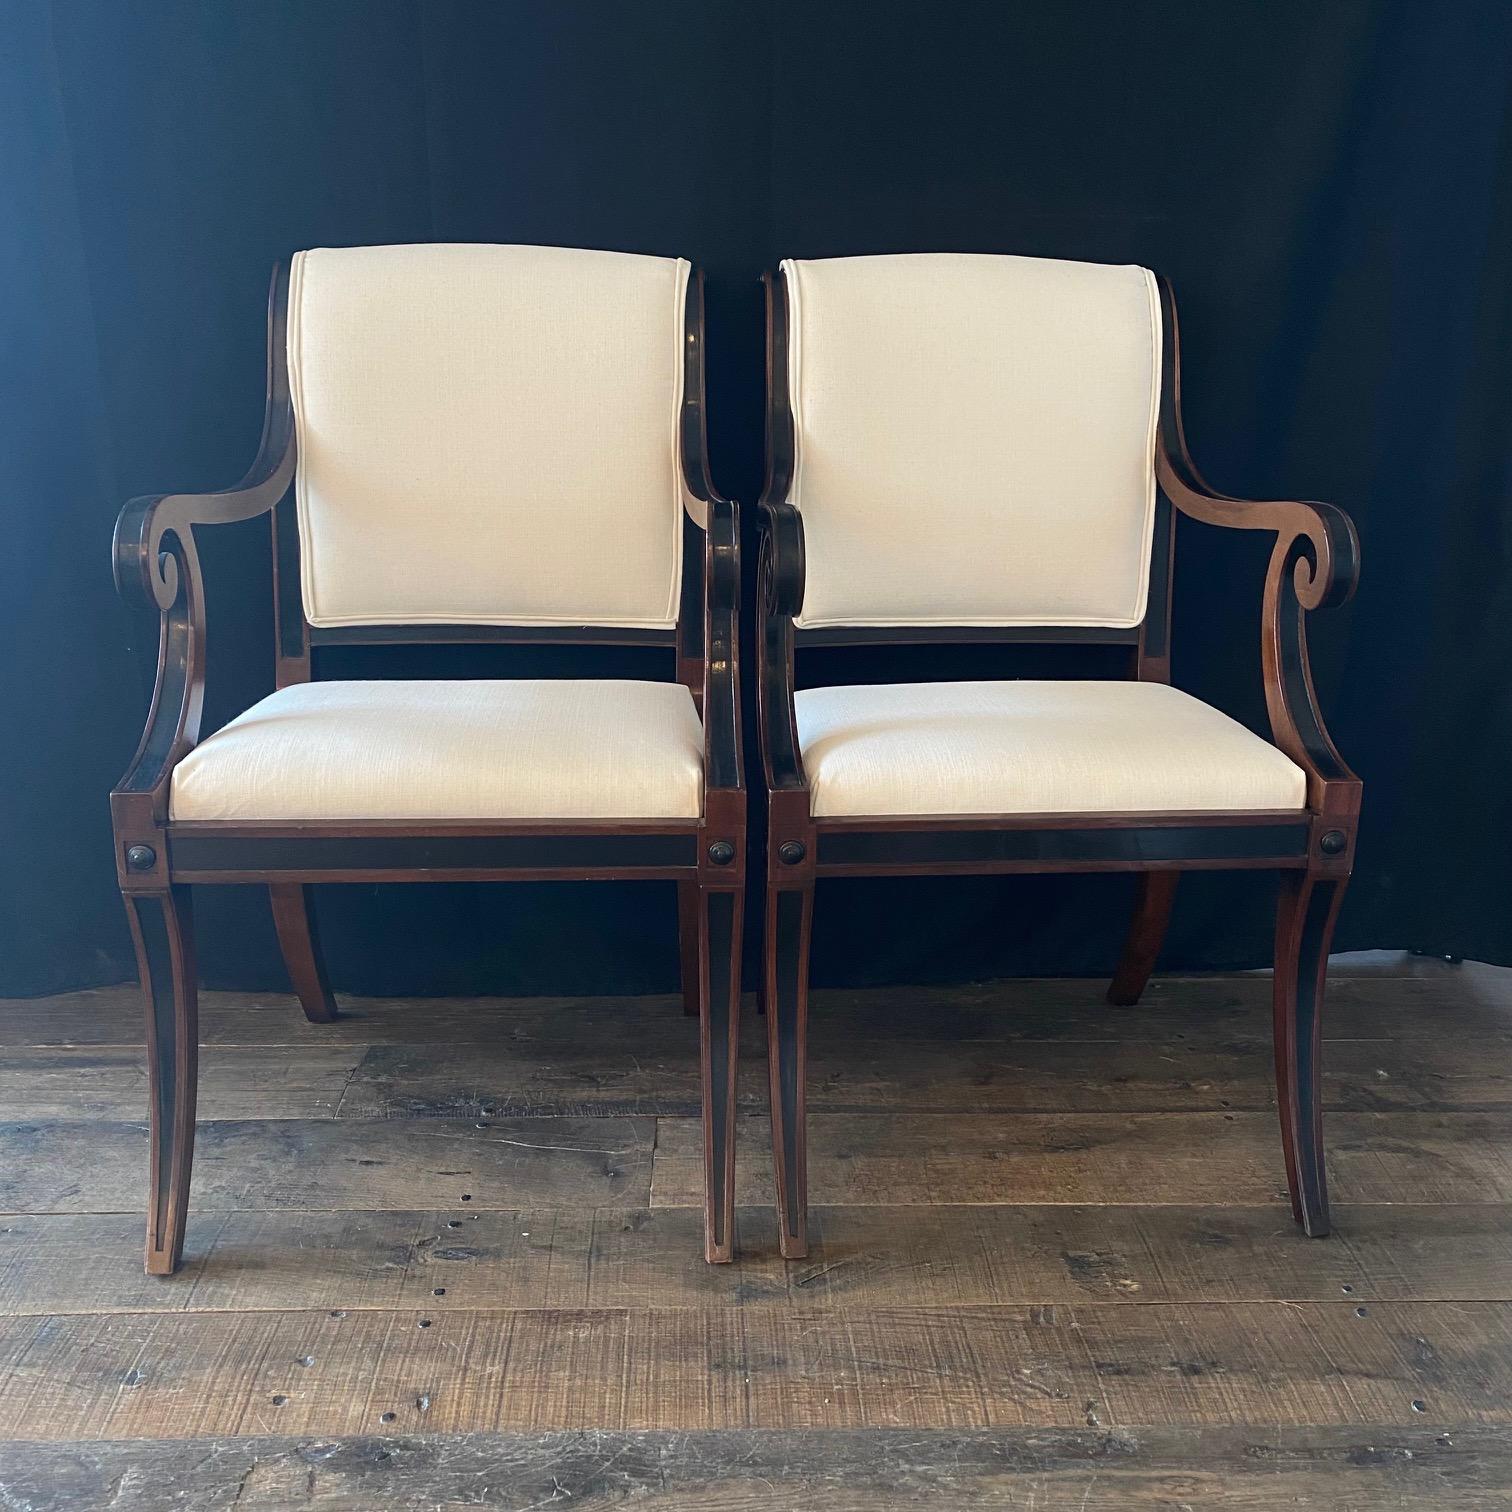 A spectacular set of klismos dining chairs: ebony and mahogany Neoclassical style with new neutral high end upholstery designed to showcase the classic design of each chair. Two armchairs and three side chairs. Decorative wood frame rising on four